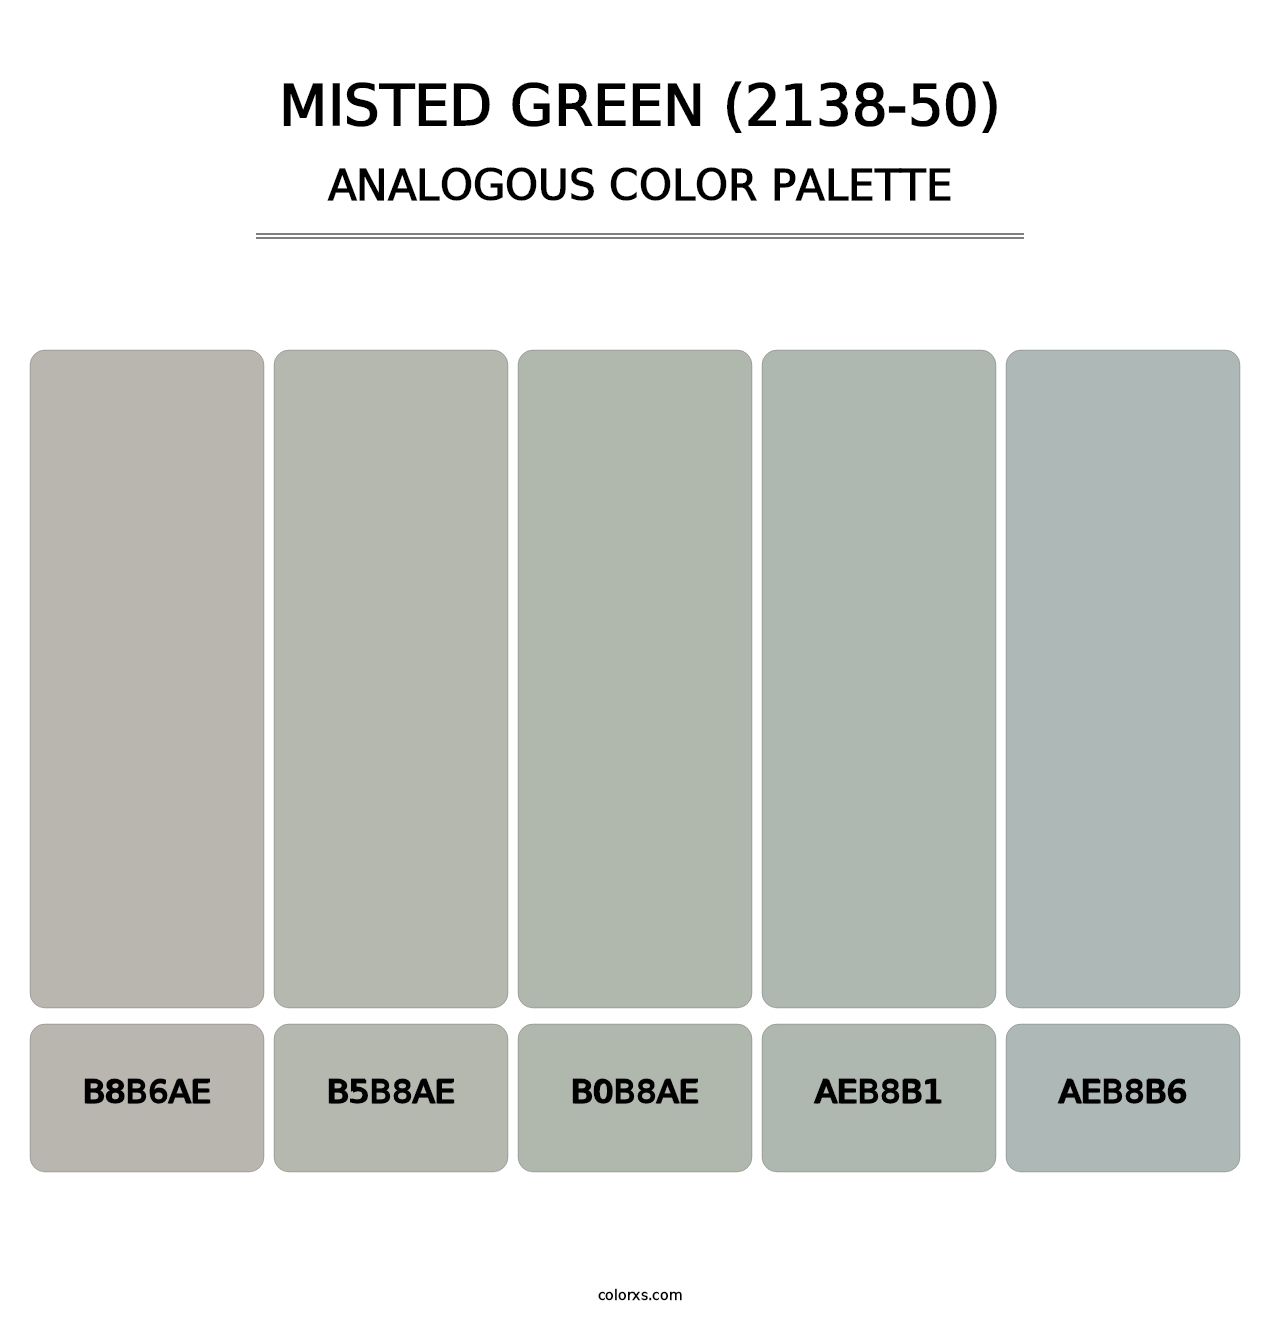 Misted Green (2138-50) - Analogous Color Palette